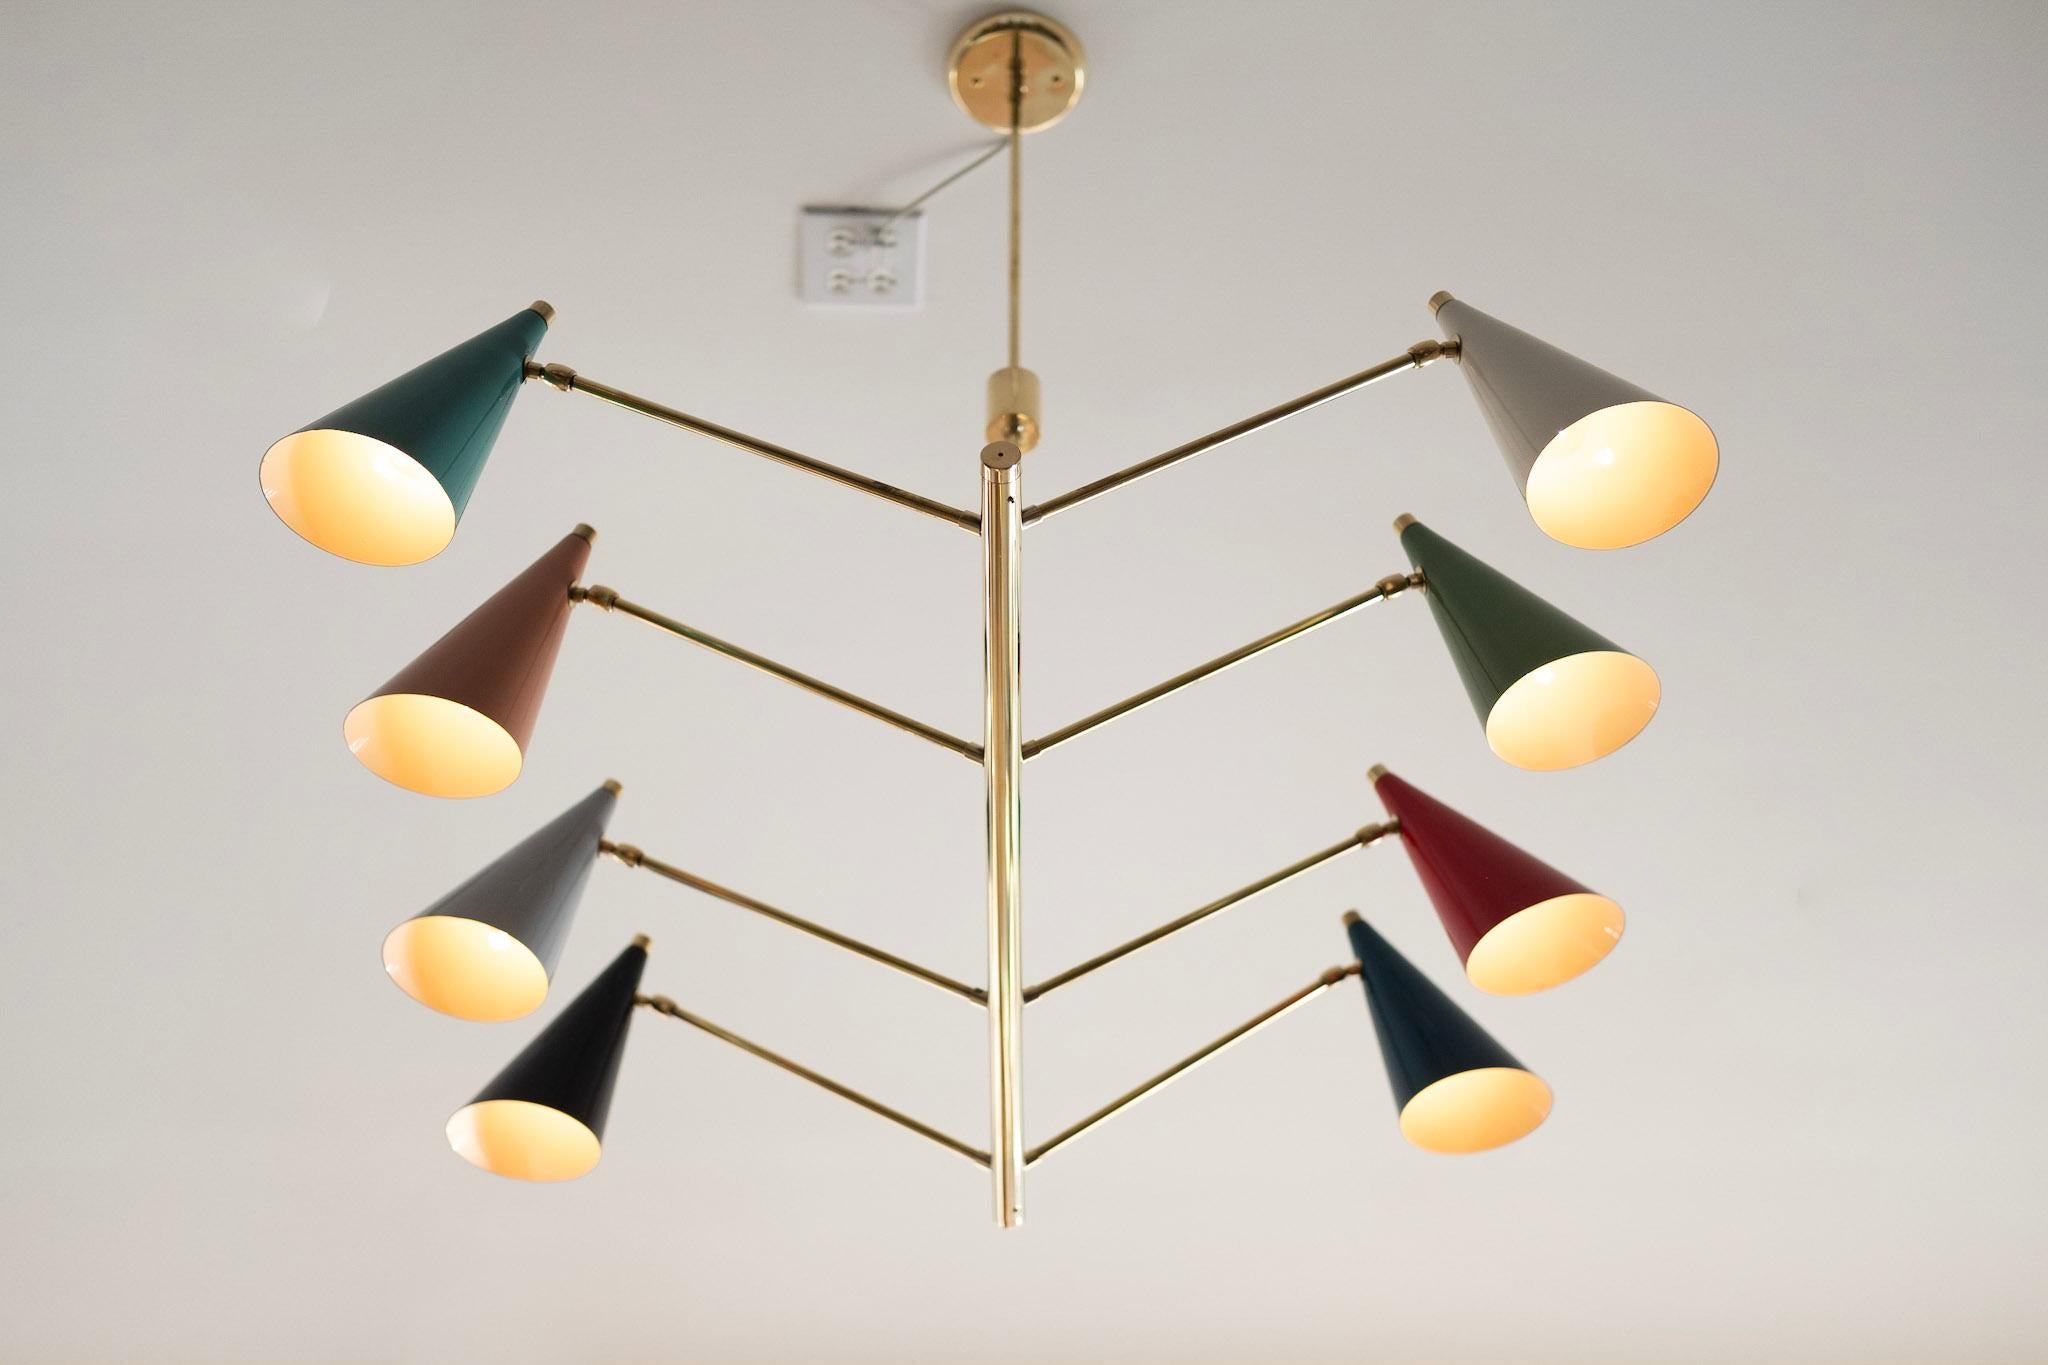 Newly produced Italian ceiling pendant with multi-color metal cone shades.
Brass stem and hardware.
Newly rewired.

Newly produced in Italy - Colors may vary - photos are examples of color possibilities/variation.